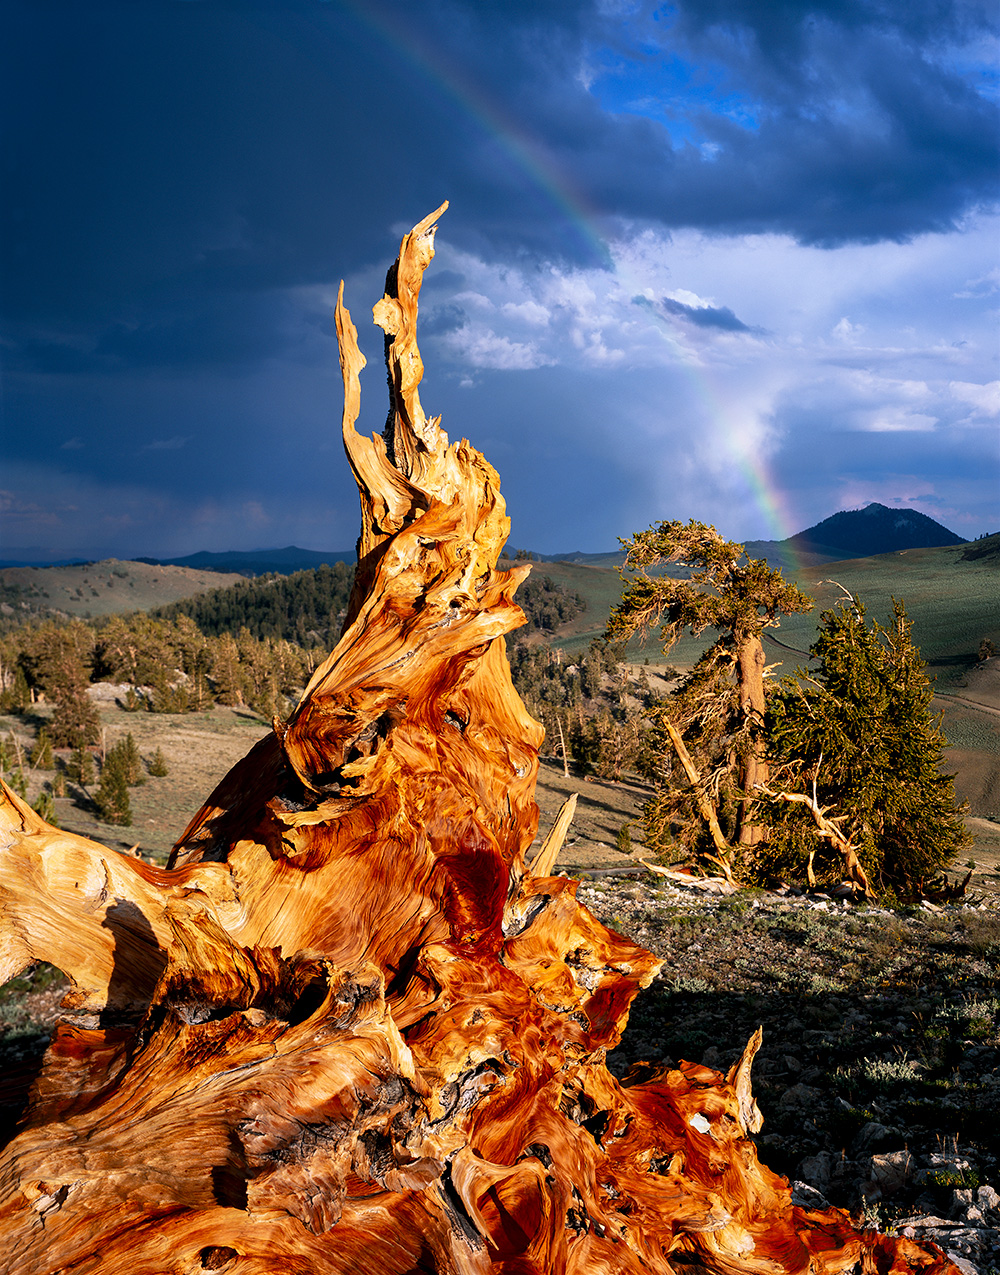 Ancient bristlecone root structure and rainbow in a clearing summer storm, Inyo National Forest, White Mountains, California. This image shows upturned and eroded bristlecone pine roots in an area of the White Mountains near the Patriarch Grove that received wilderness designation under the Eastern Sierra and Northern San Gabriel Wild Heritage Act. It was used by the Wilderness Society to highlight the beauty and de facto wilderness status of the White Mountains.